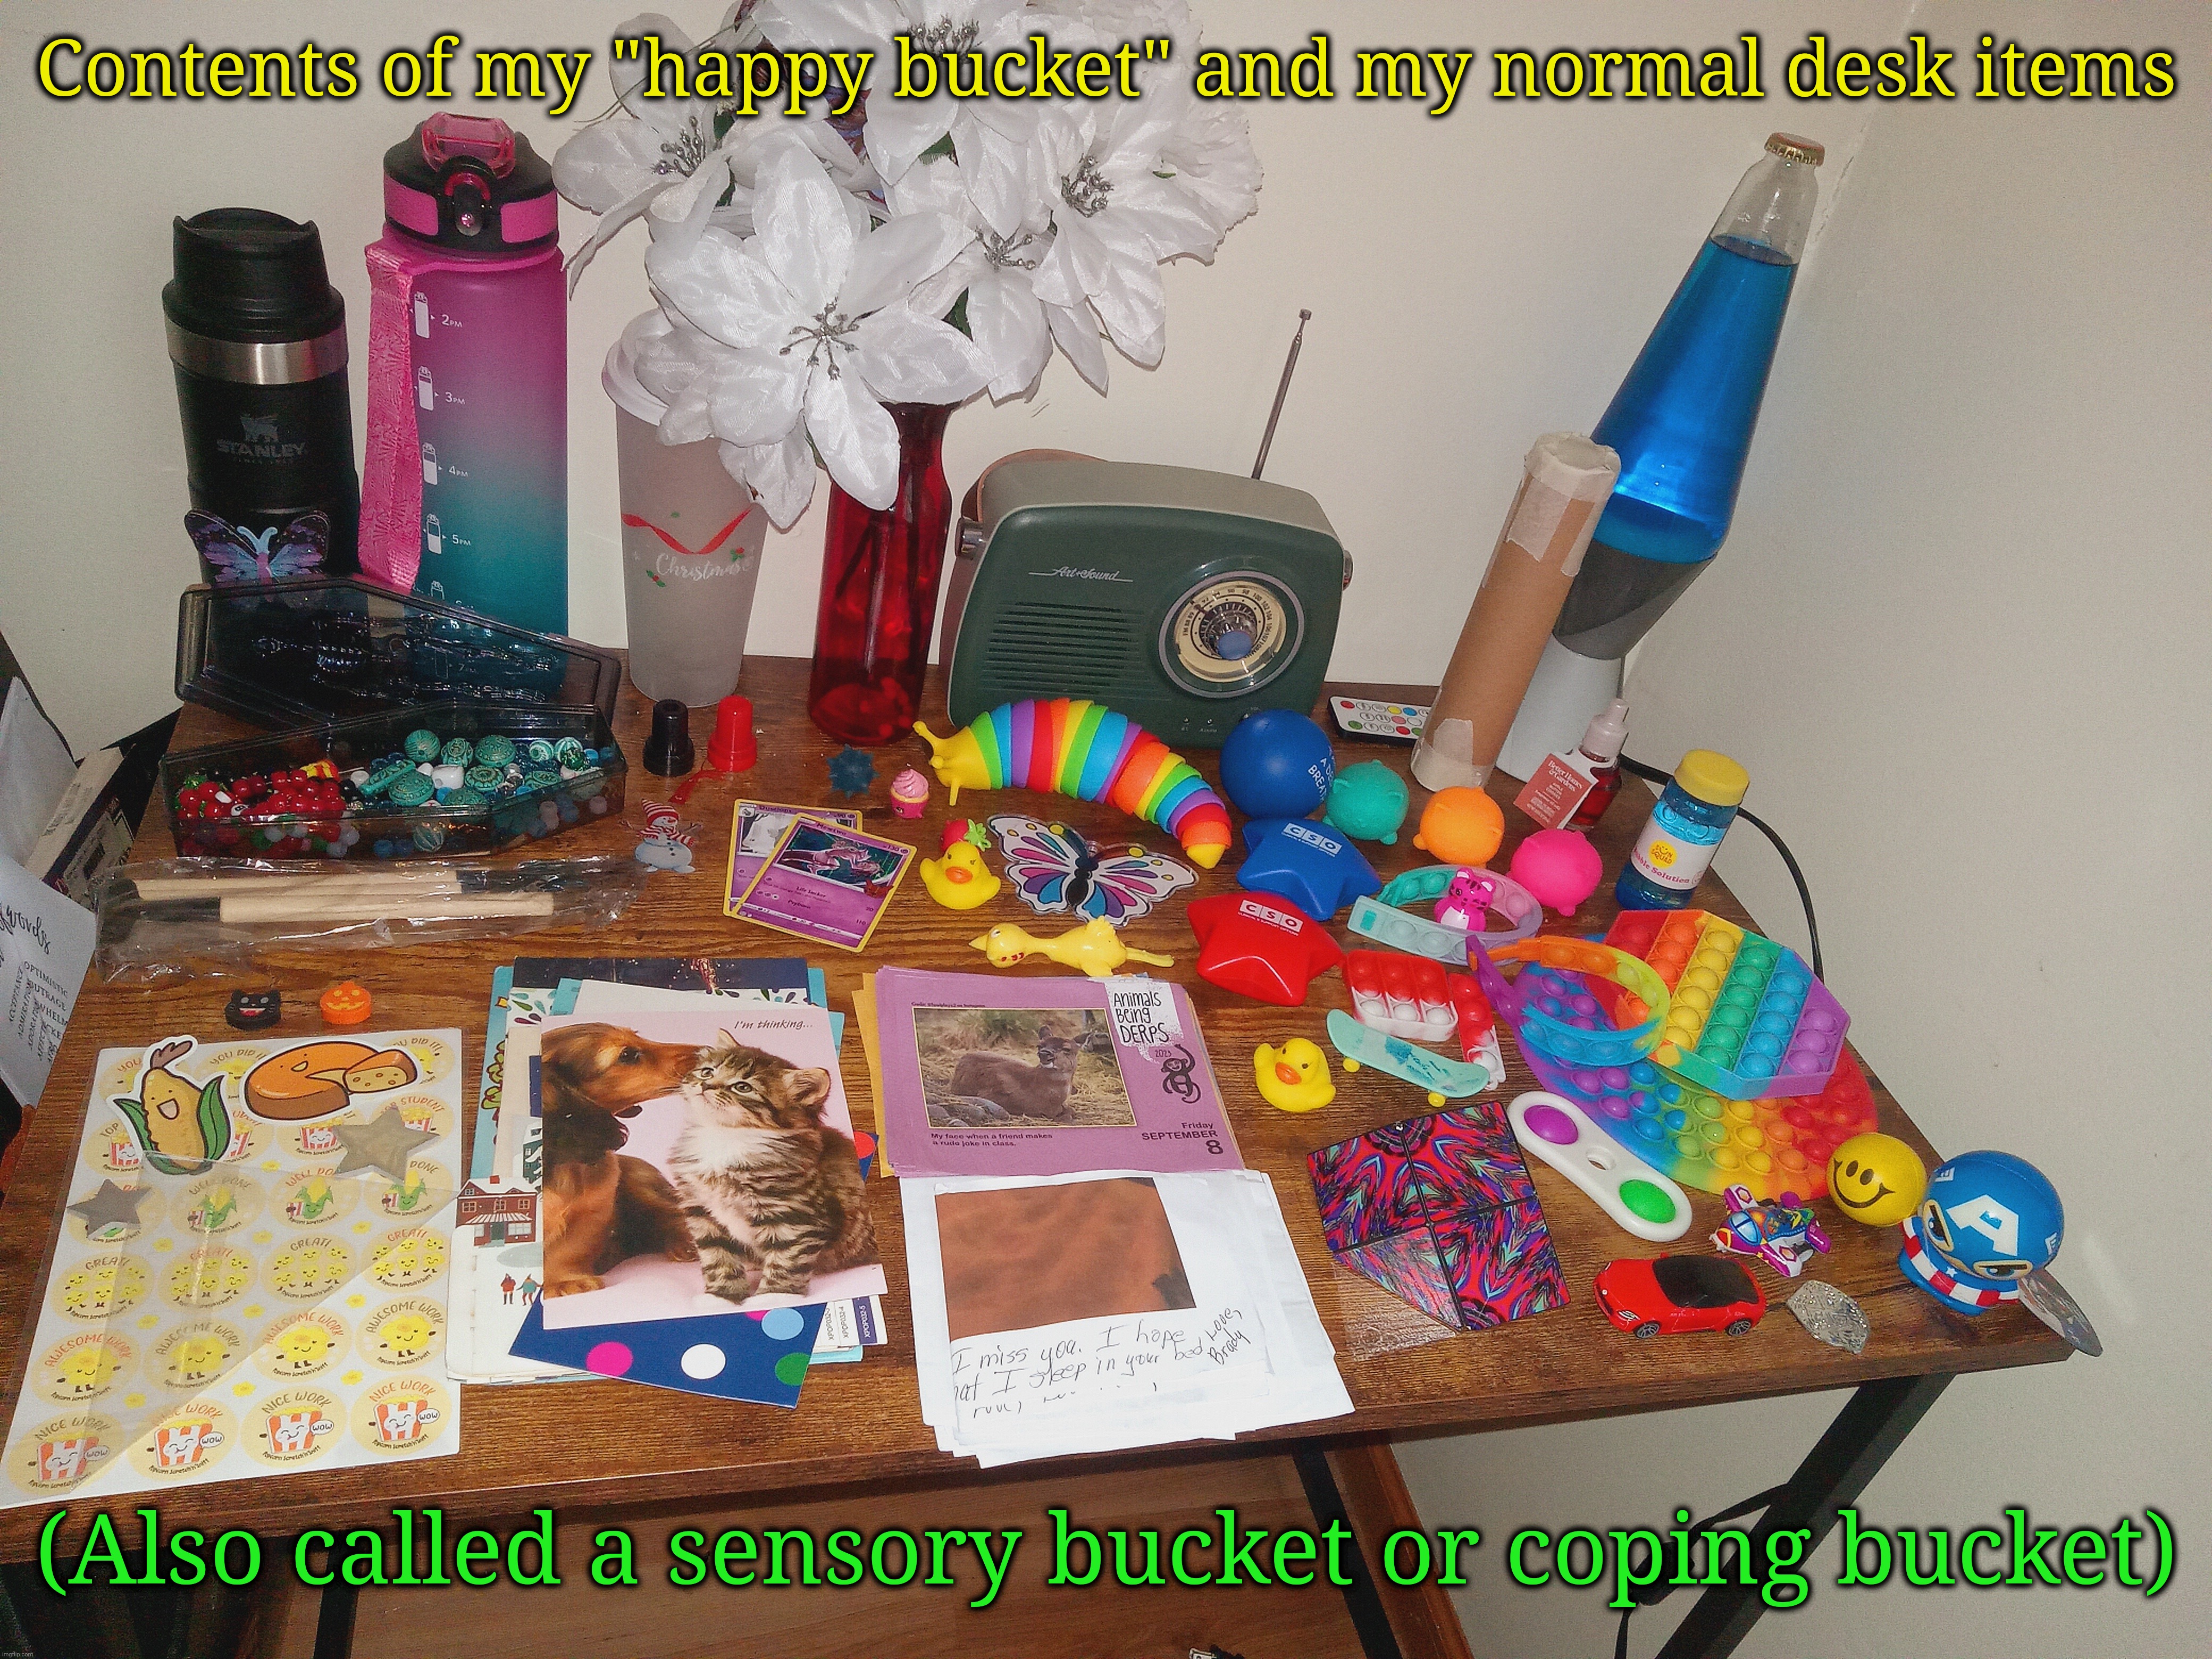 Contents of my "happy bucket" and my normal desk items; (Also called a sensory bucket or coping bucket) | made w/ Imgflip meme maker